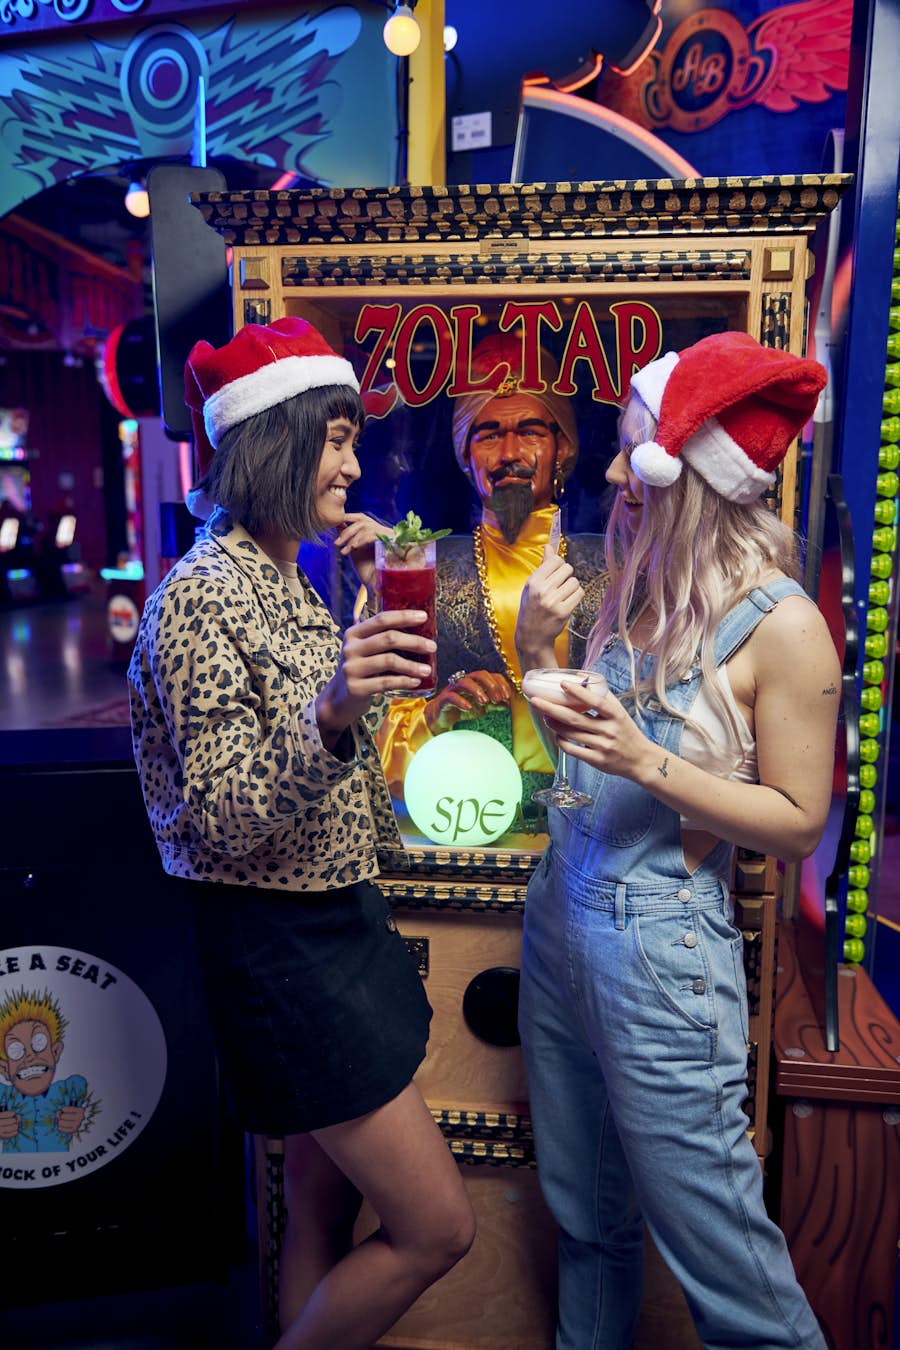 Two women standing by Zoltar arcade game wearing Santa hats